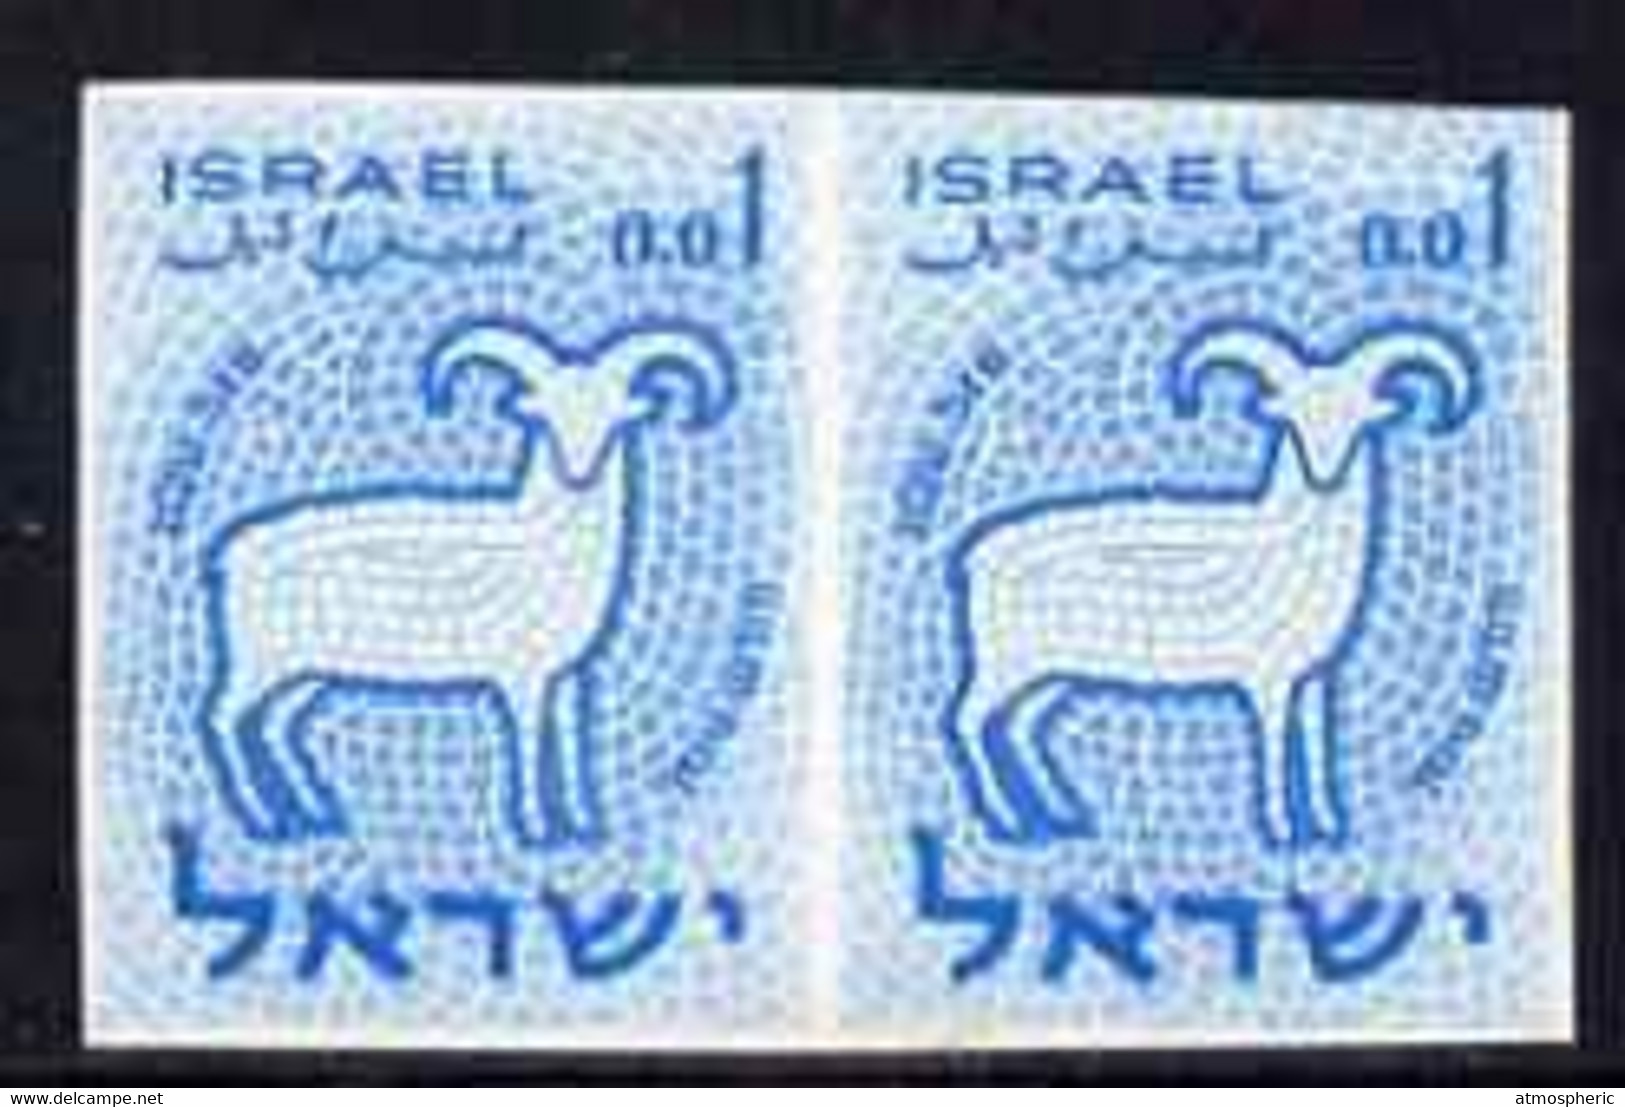 77640 Israel 1961 Zodiac 1a Aries Imperf Pair In Blue (issued Stamp Was Emerald) From The Only Sheet Known U/M - Non Dentellati, Prove E Varietà